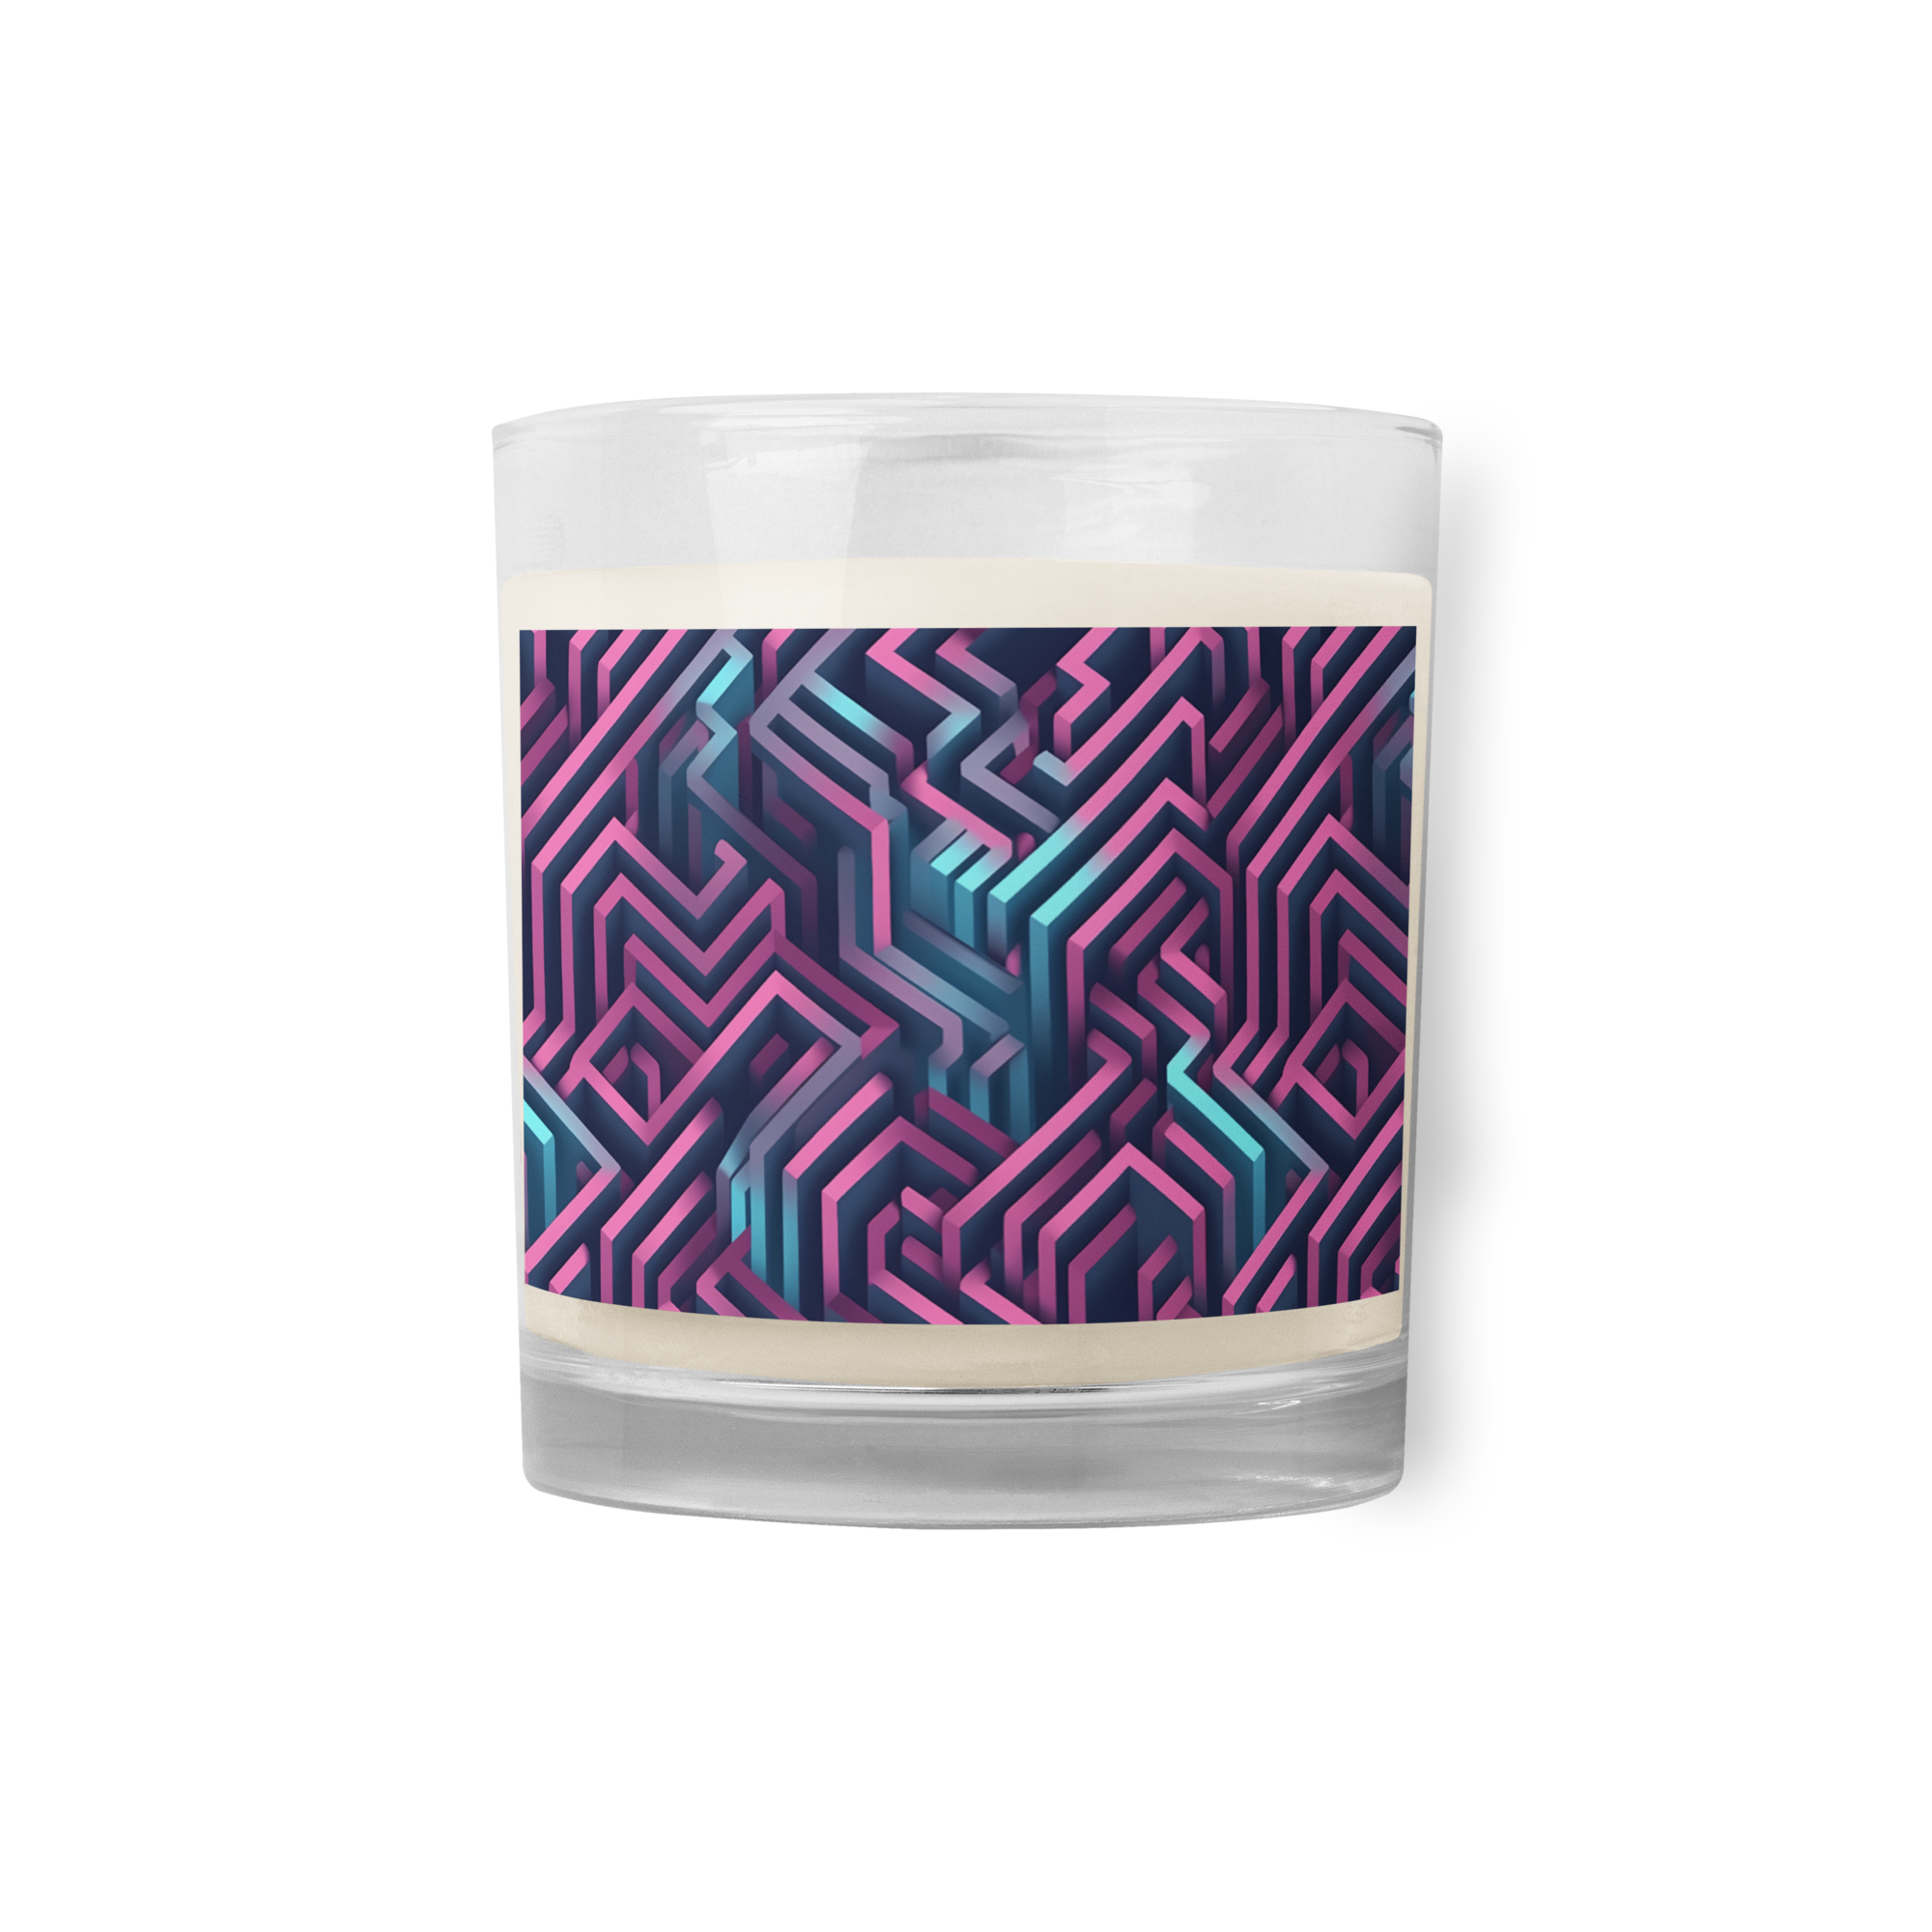 3D Maze Illusion | 3D Patterns | Glass Jar Soy Wax Candle - #4